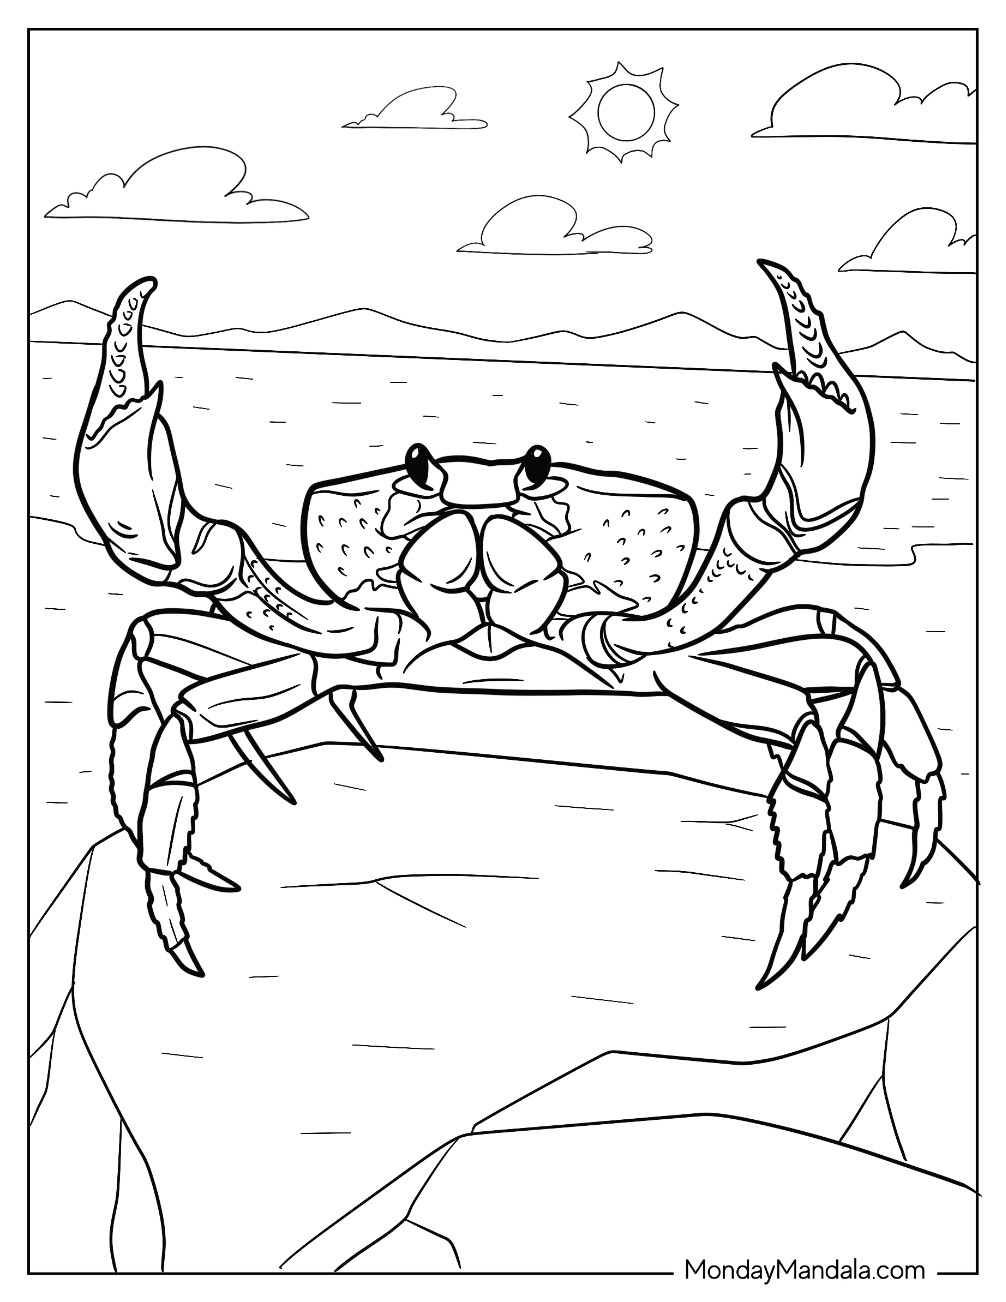 Crab coloring pages free pdf printables